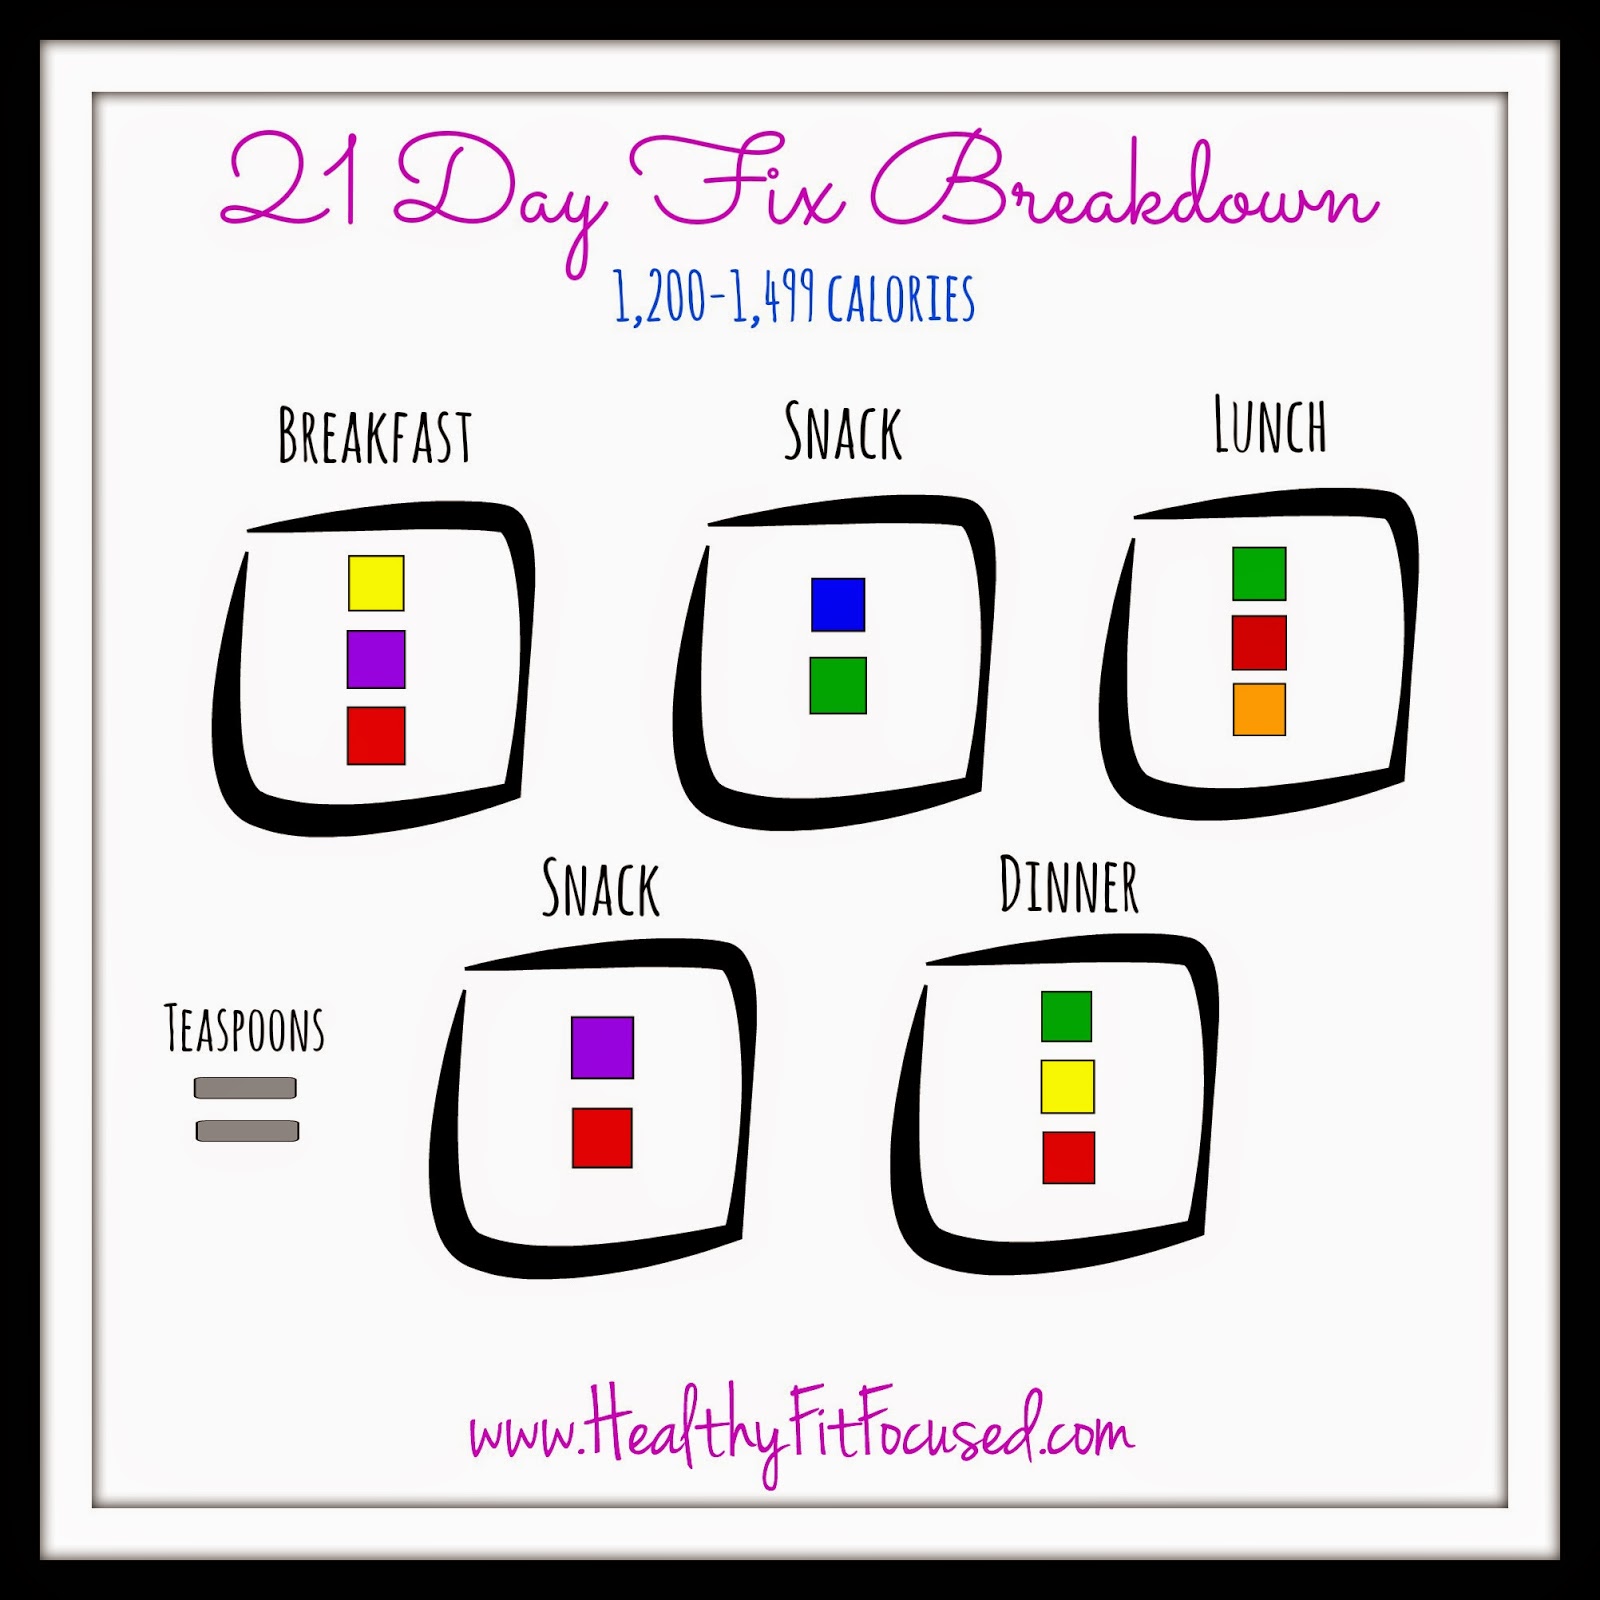 21 Day Fix Meal Breakdown, 21 Day Fix Cheat Sheet, 21 Day Fix Made Easy, 1200-1499 calories, 